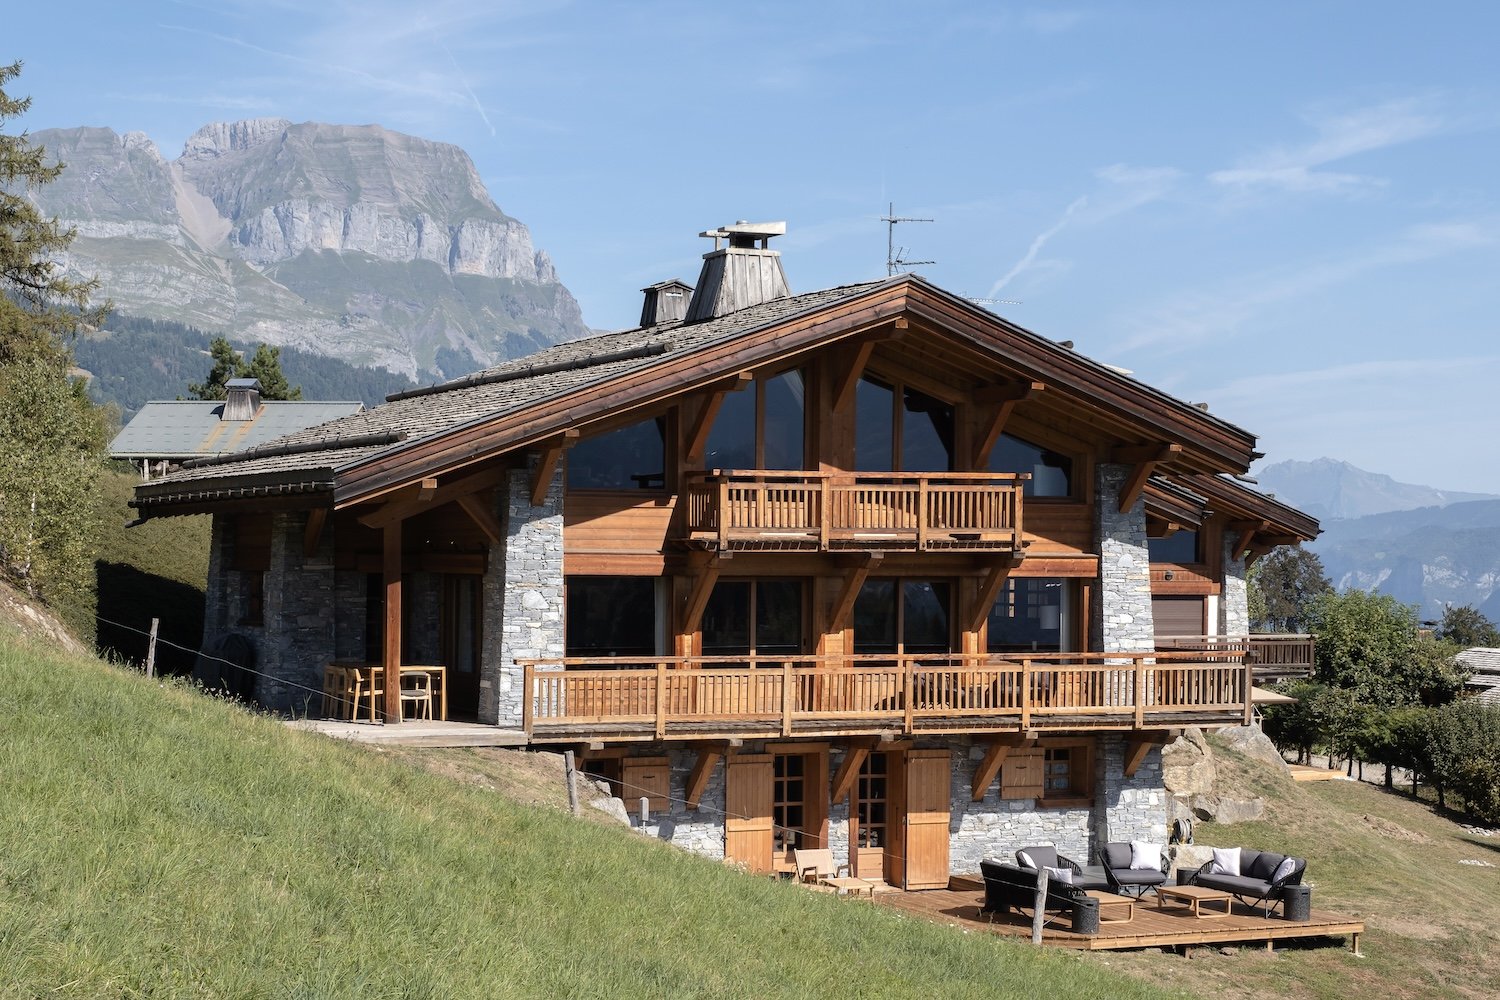 Francis+York+Discover This Luxury Chalet in the French Alps From The August Premium Collection 00014.jpg